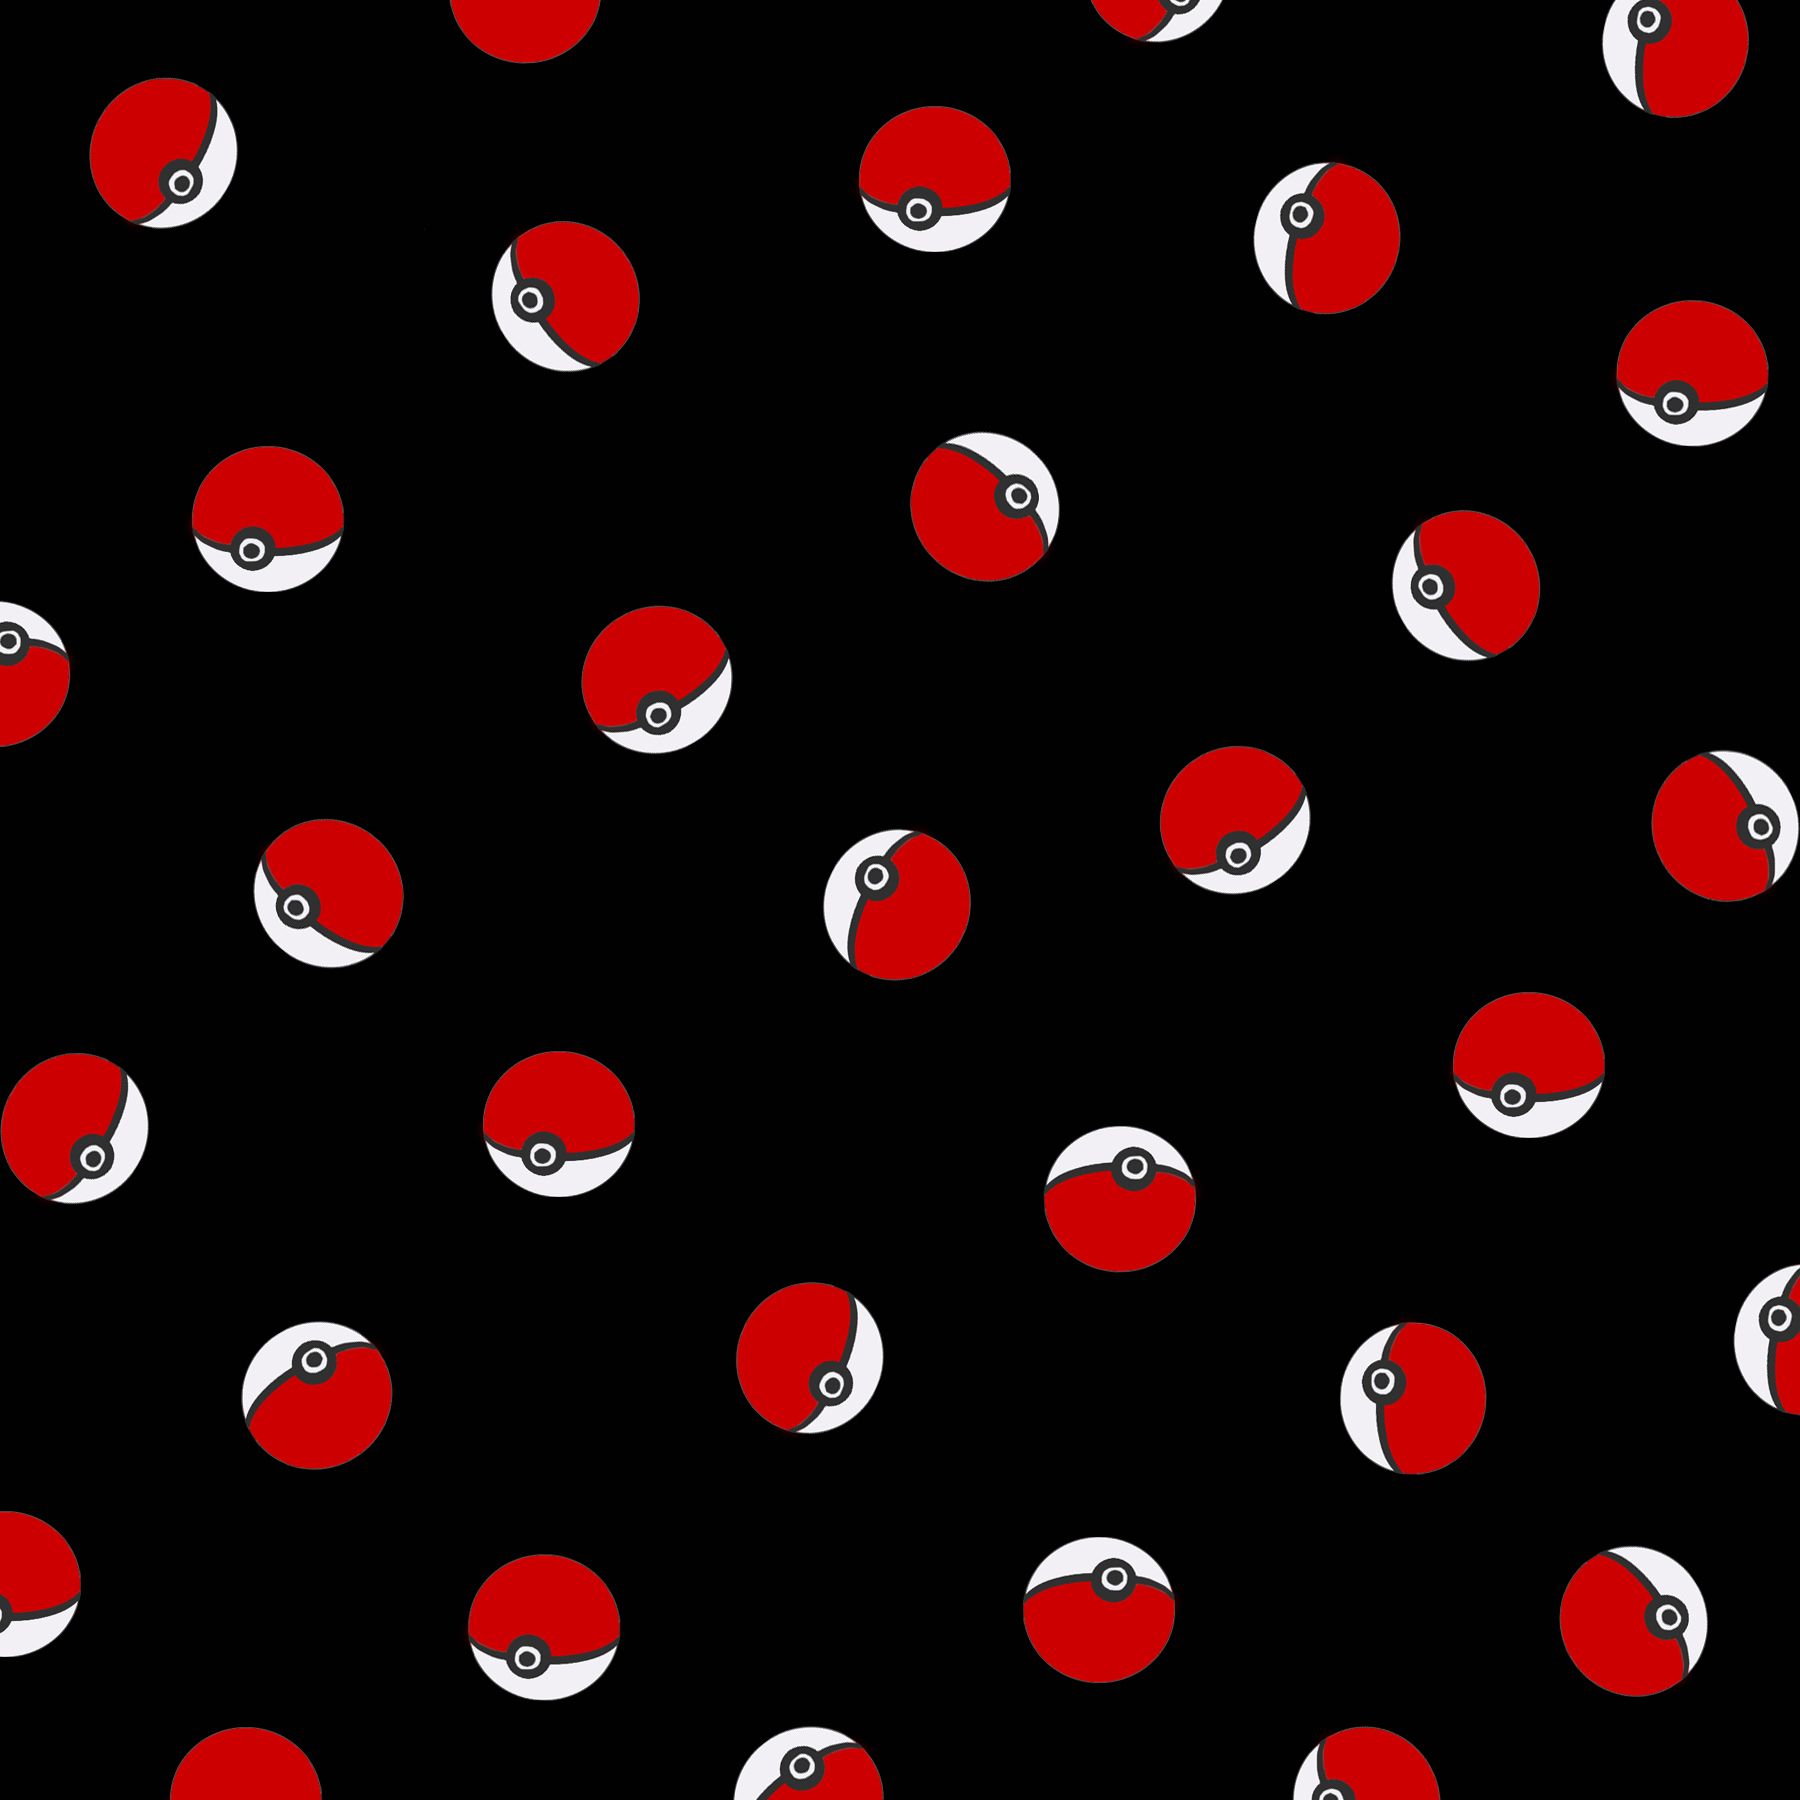 Free download Falling Pokeballs Wallpaper by Neui on [1800x1800] for your Desktop, Mobile & Tablet. Explore Pokeball Wallpaper. Pokeball Background, Pokemon in Pokeball Wallpaper, Cool Pokeball Wallpaper